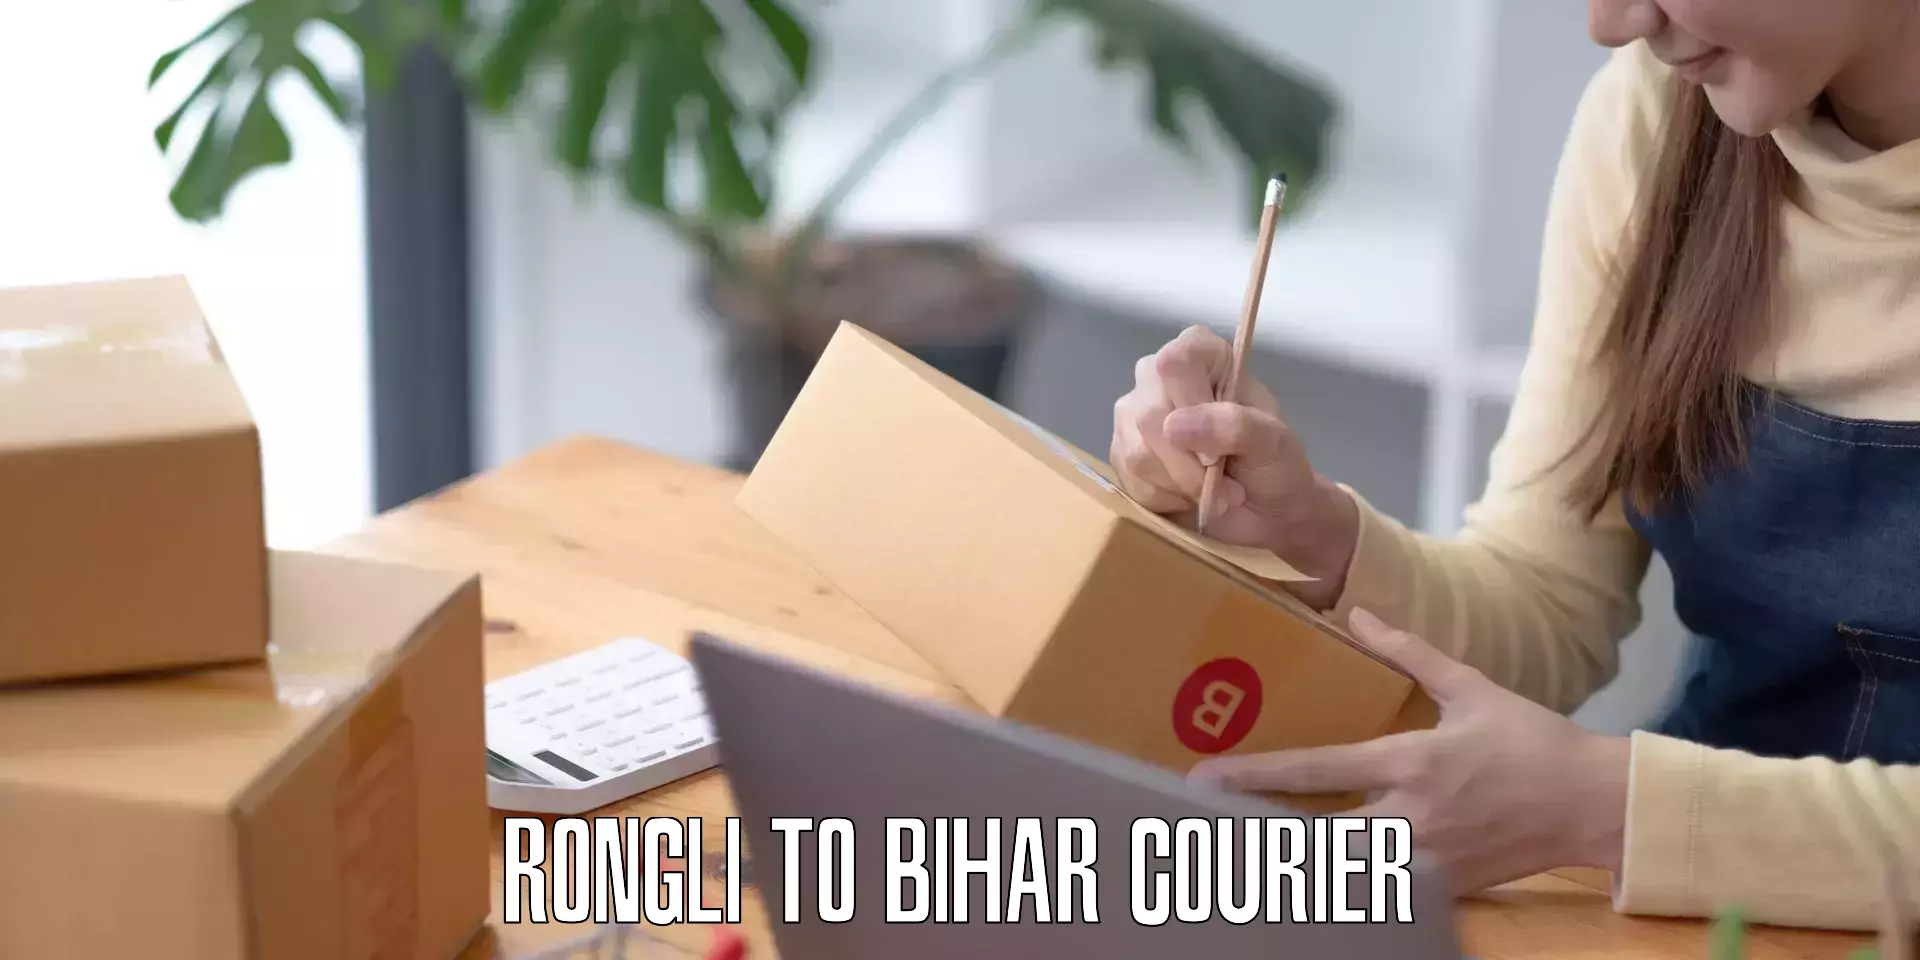 Luggage transport consultancy Rongli to Dhaka